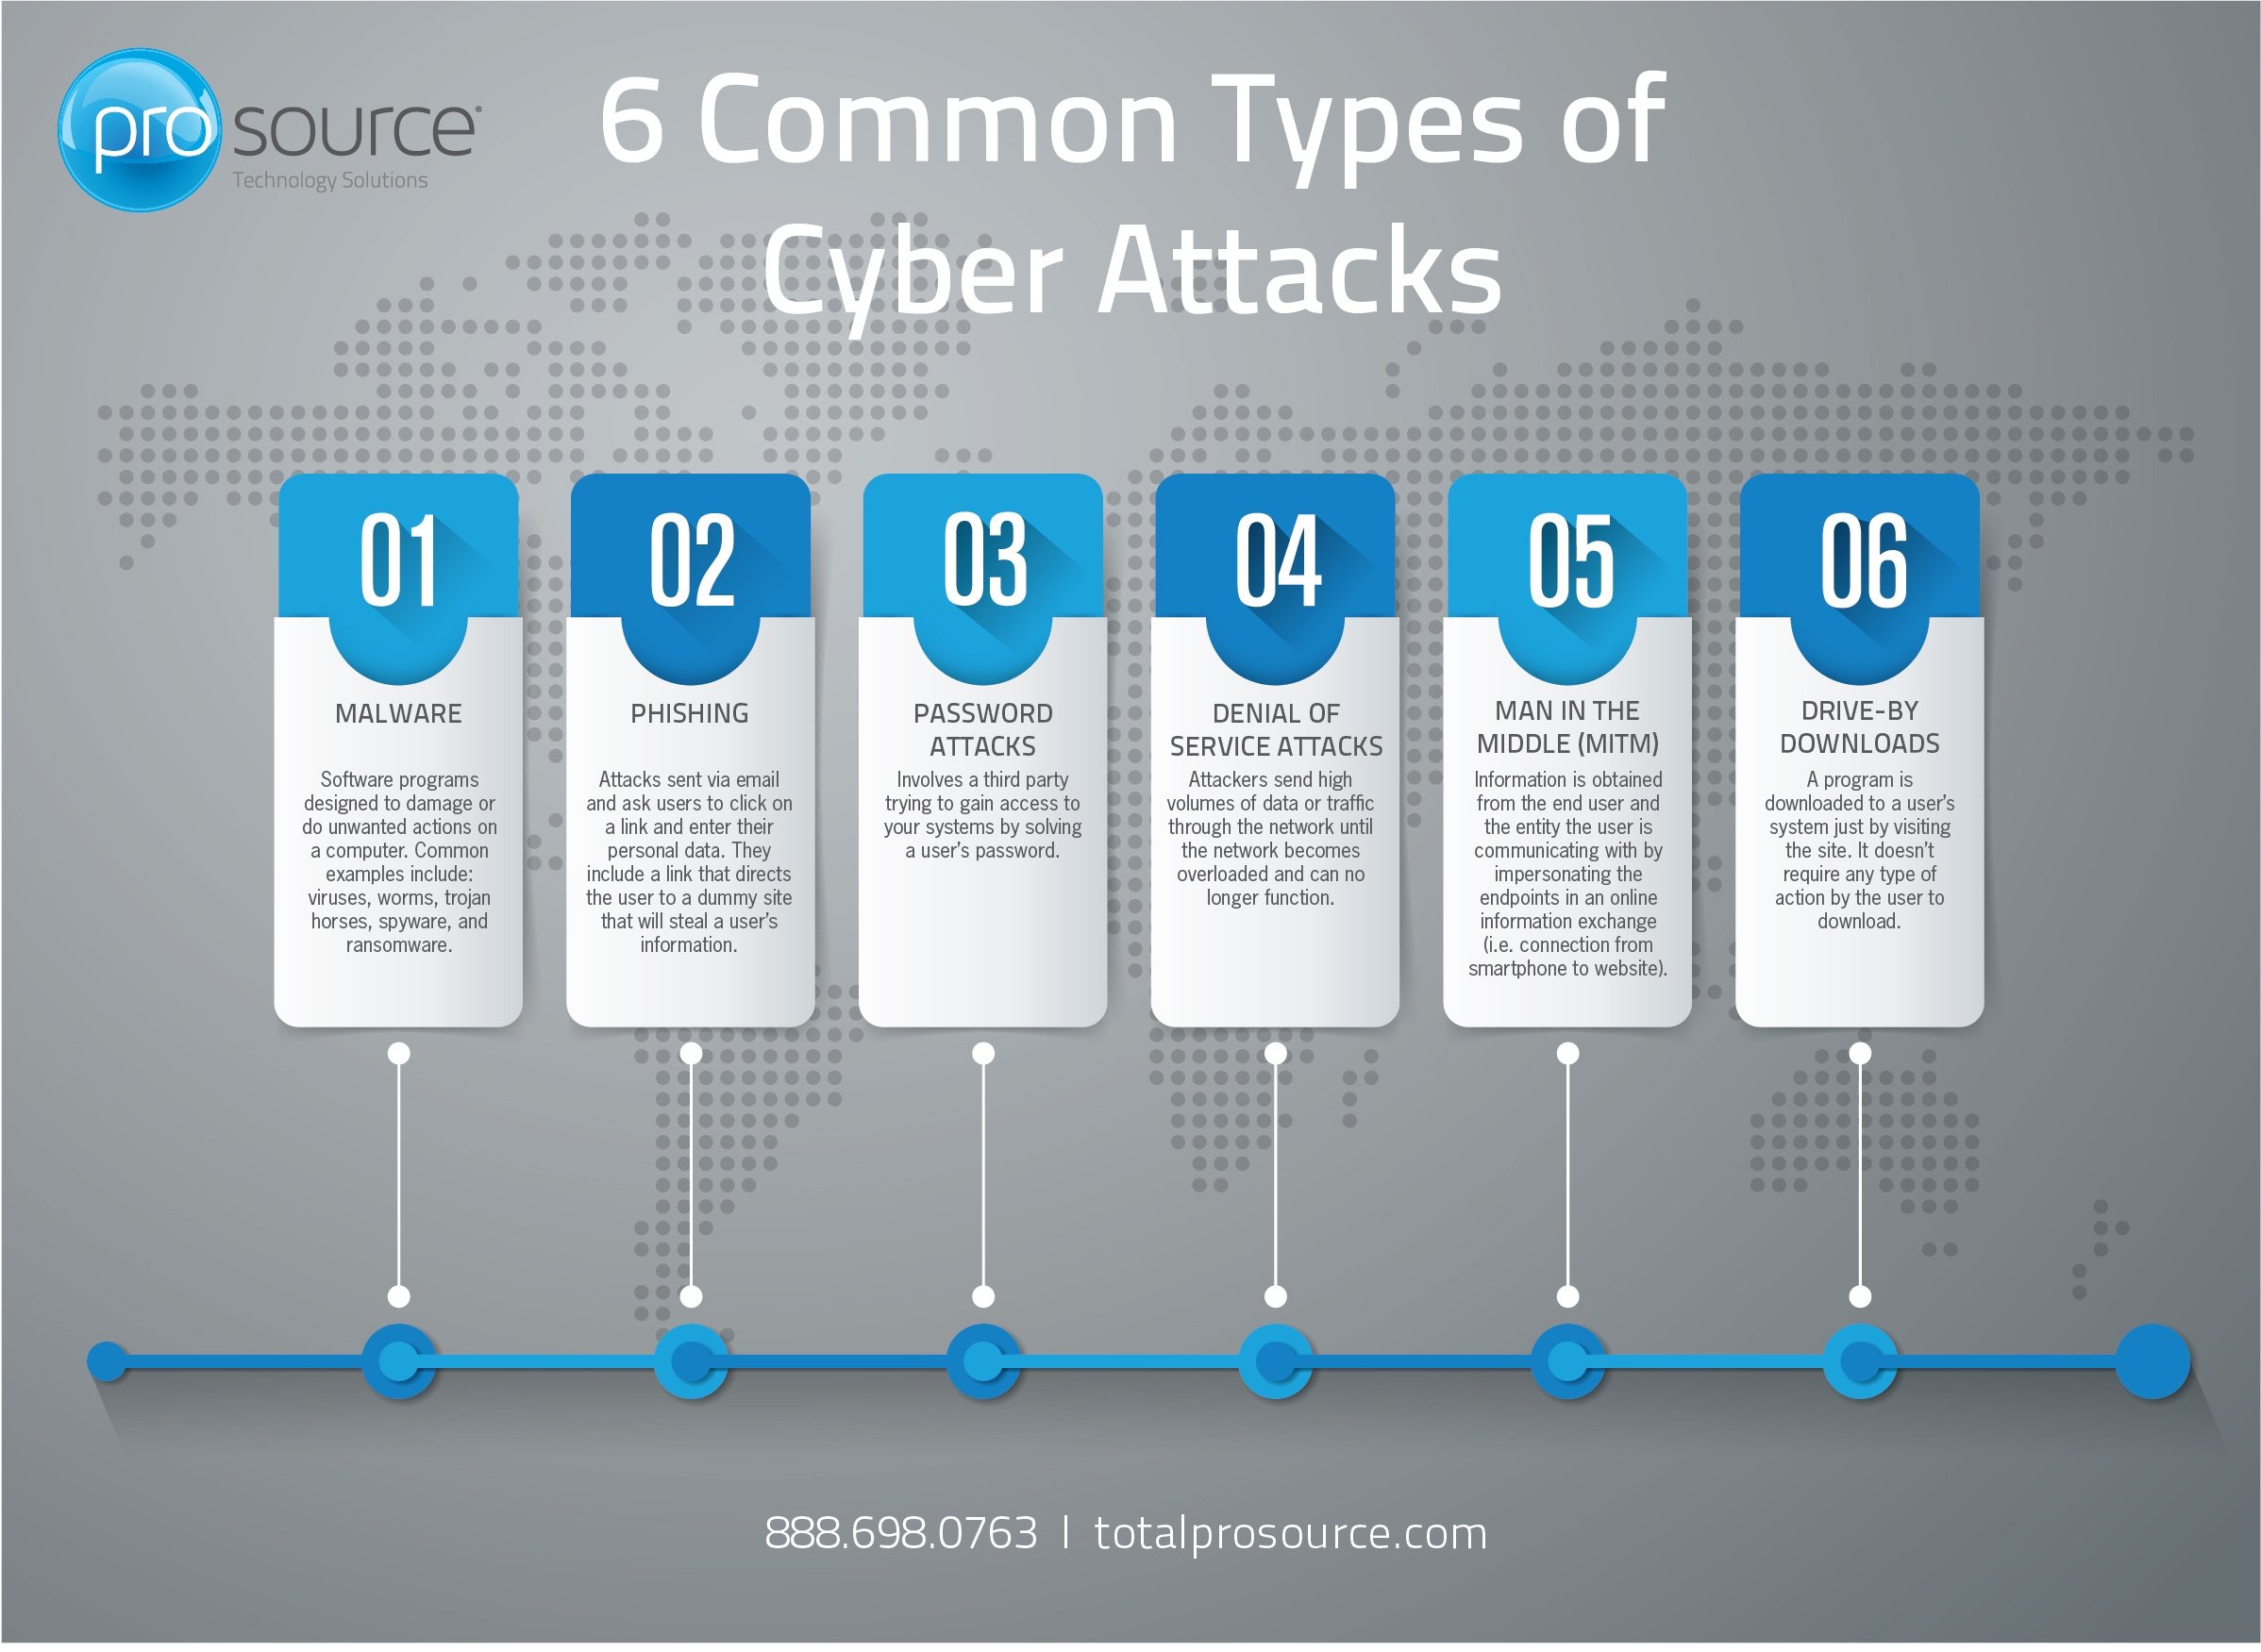 6 Common Types of Cyber Attacks